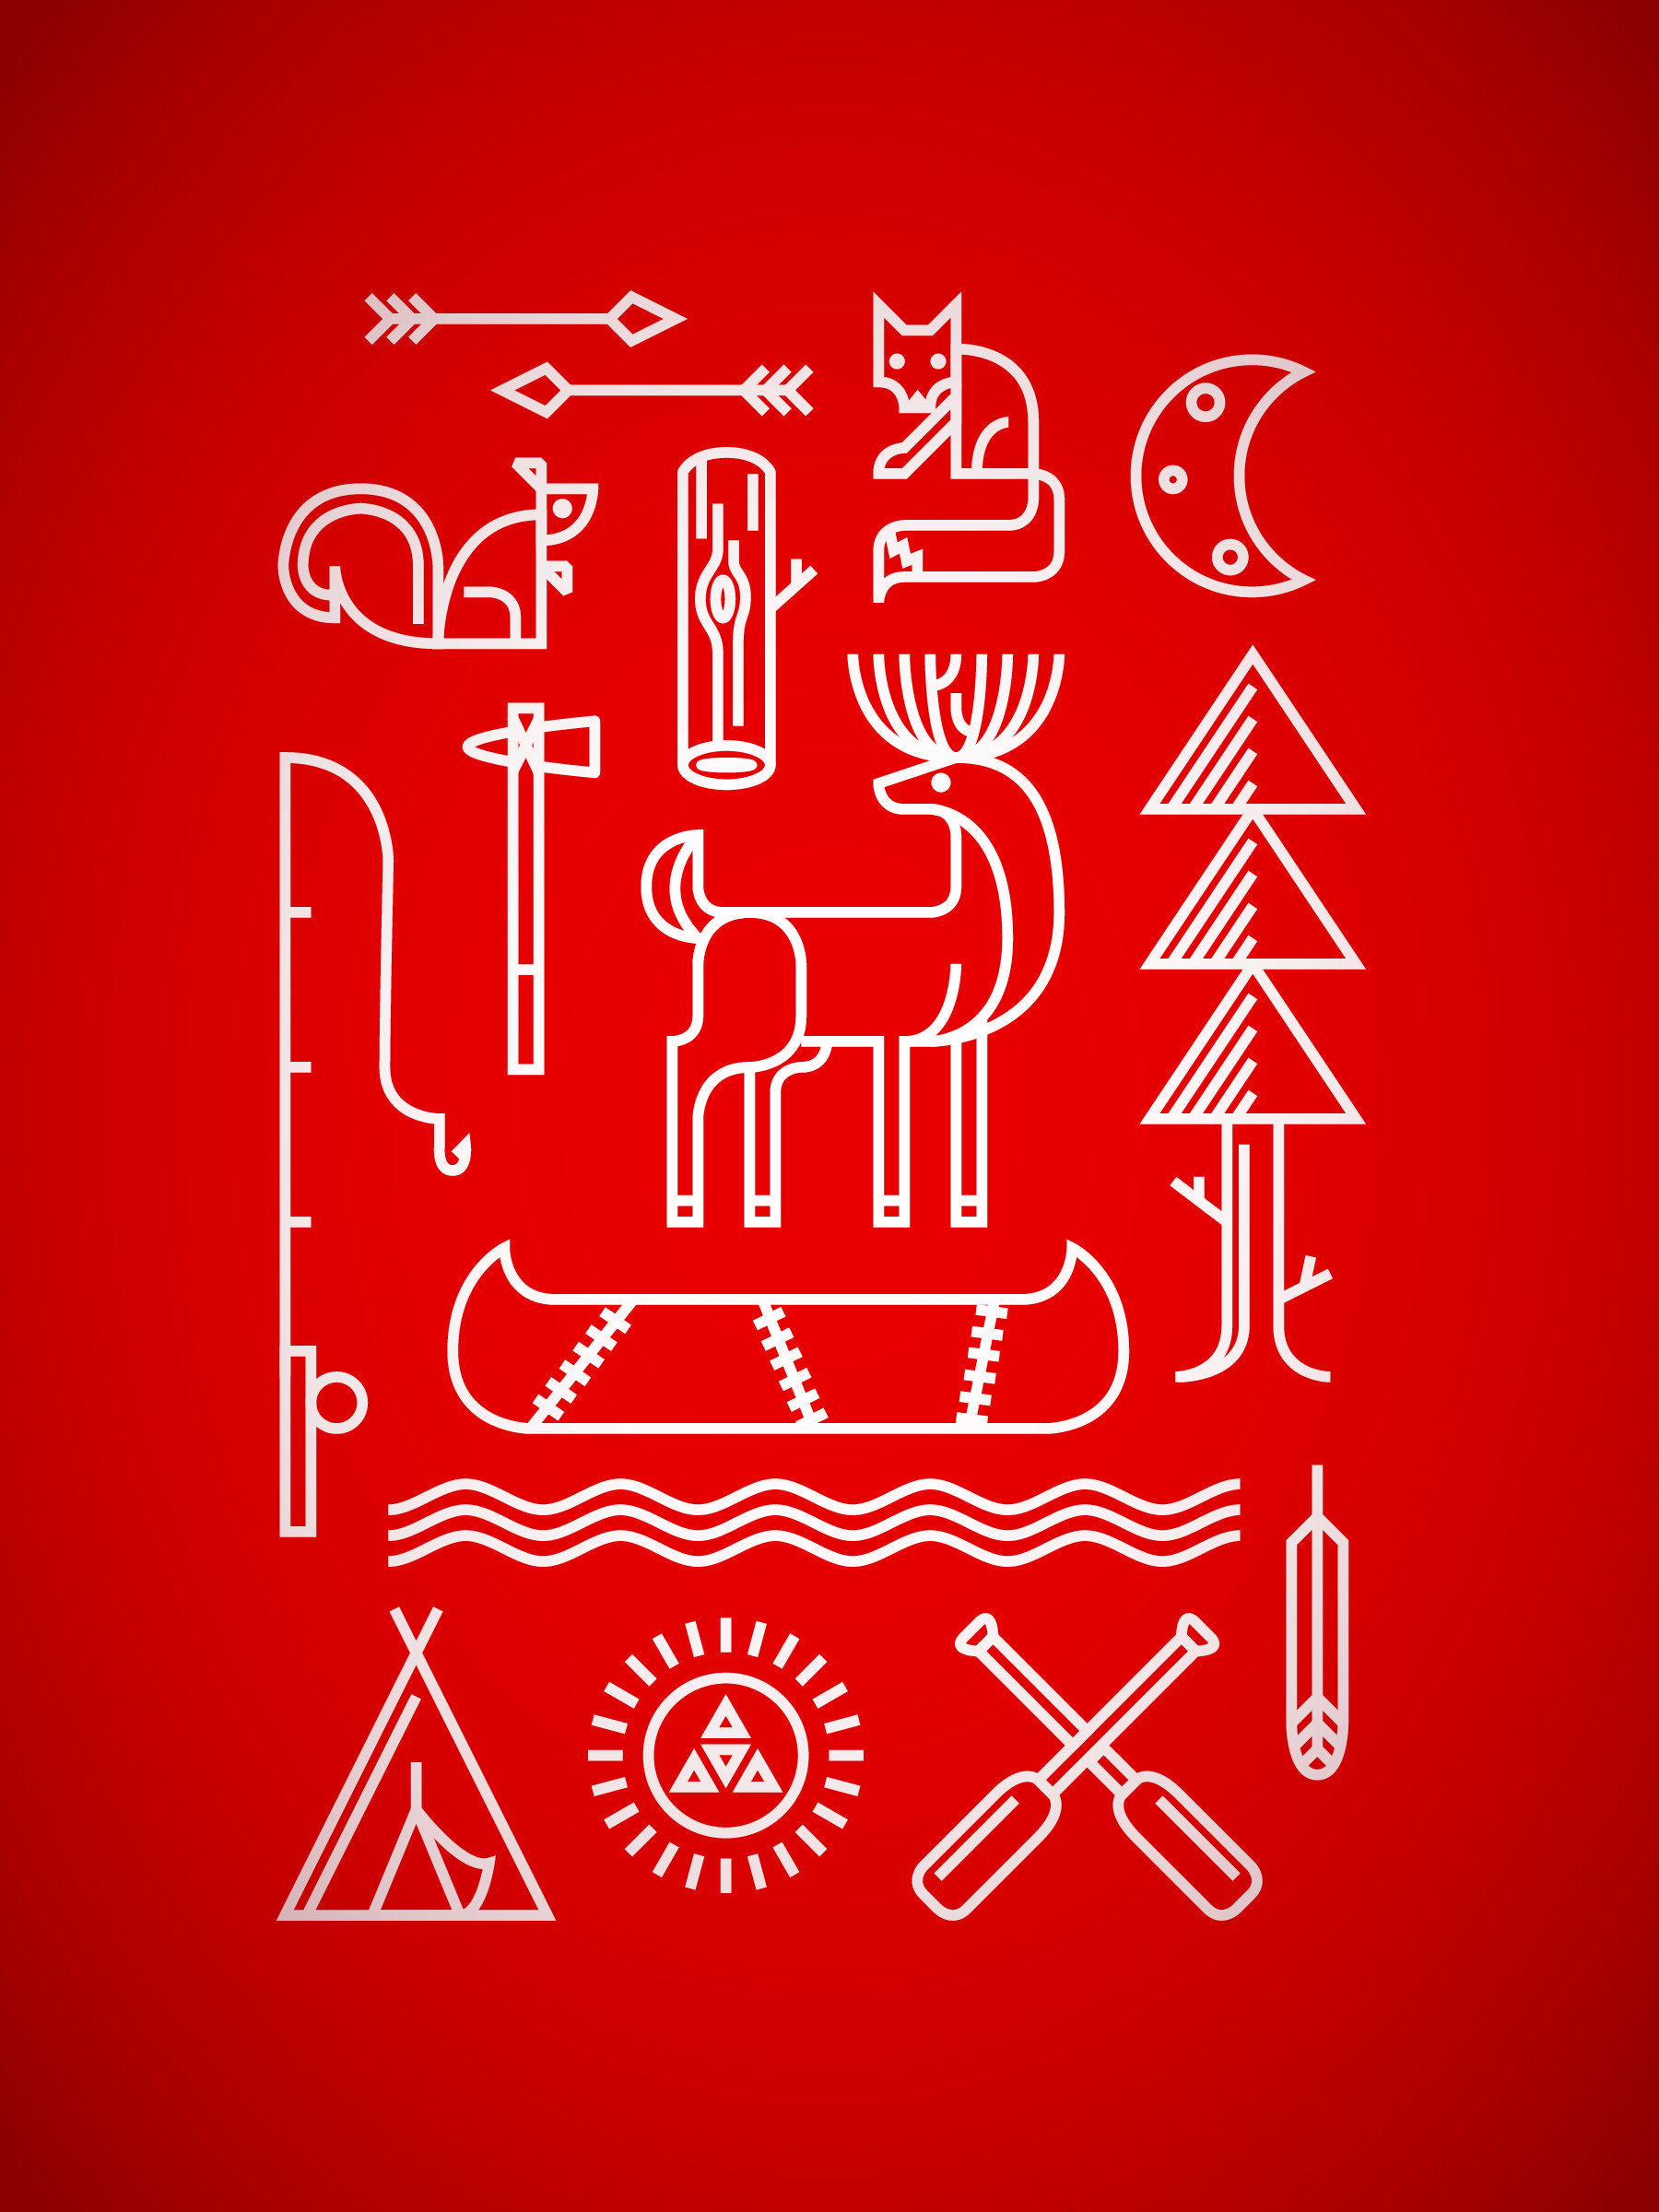 Red Outdoor Logo - Spalding Design // Camp Piomingo Summer Camp poster (Red) // Camp